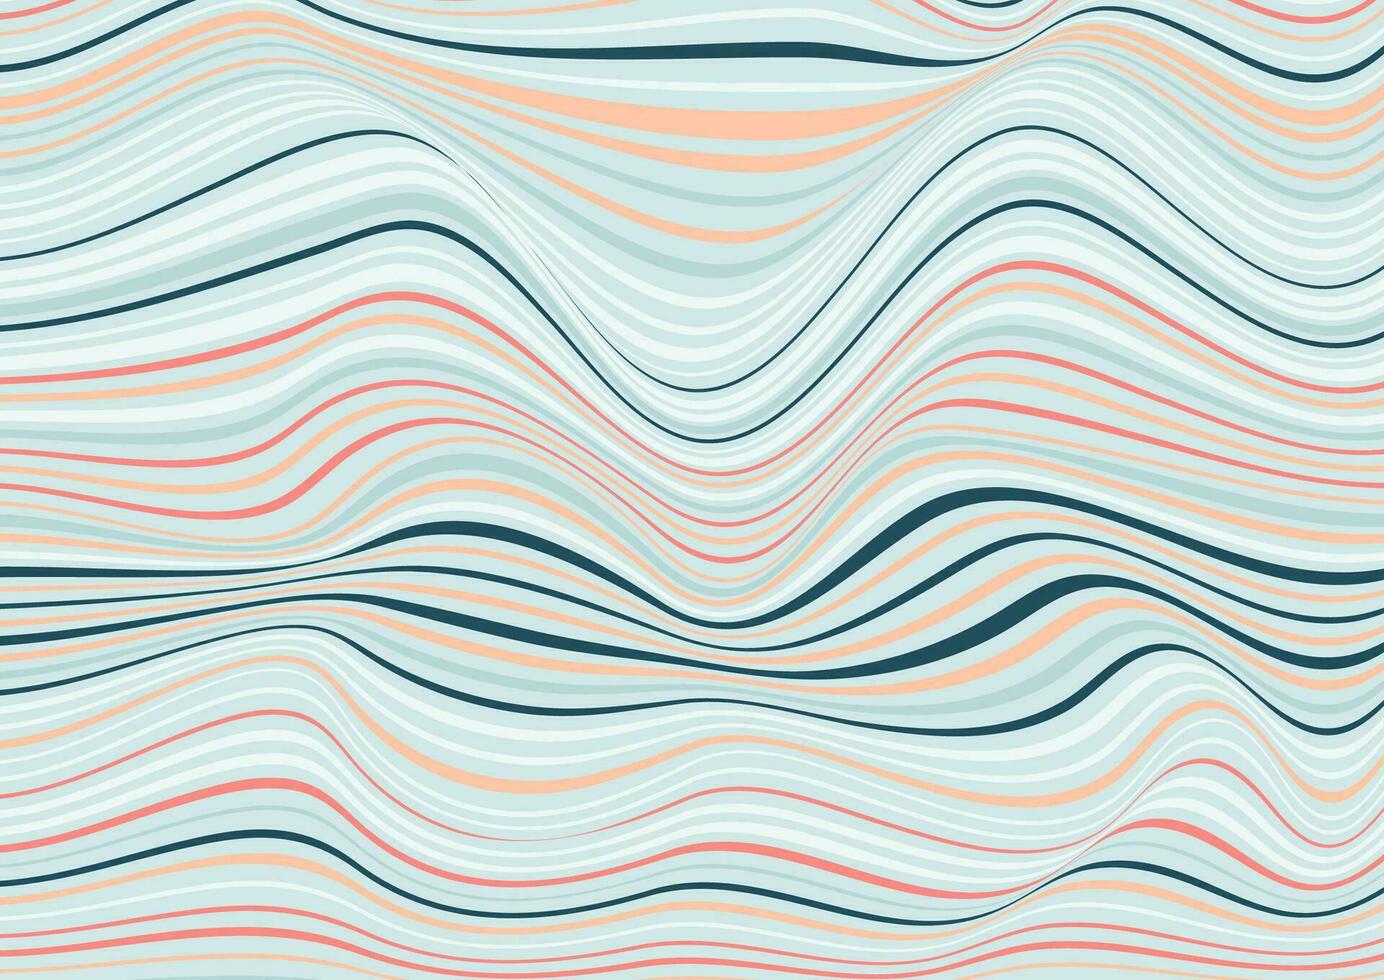 Abstract line pattern background design vector